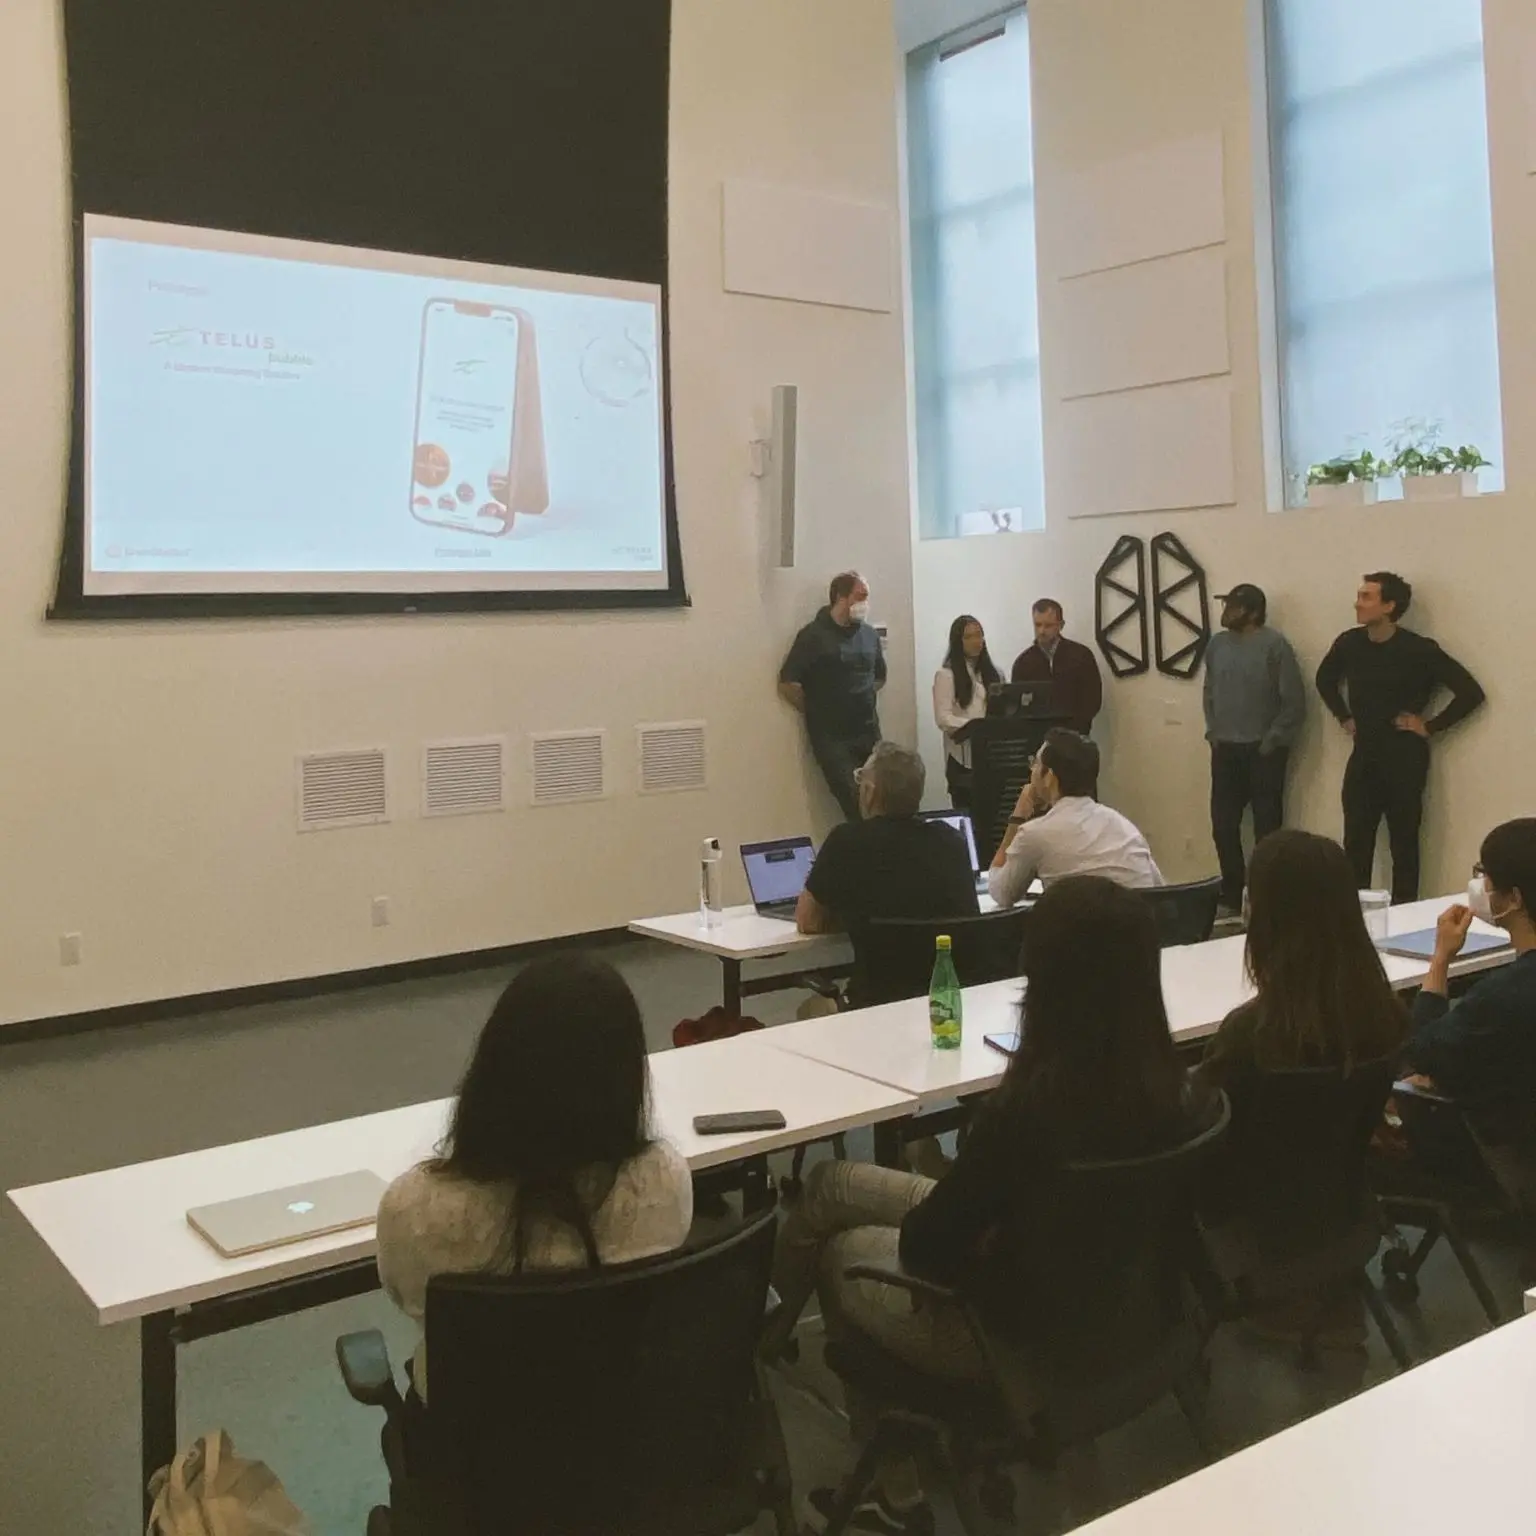 5 people stand at the front of a classroom, presenting work on a screen while people sitting at long white desks look on